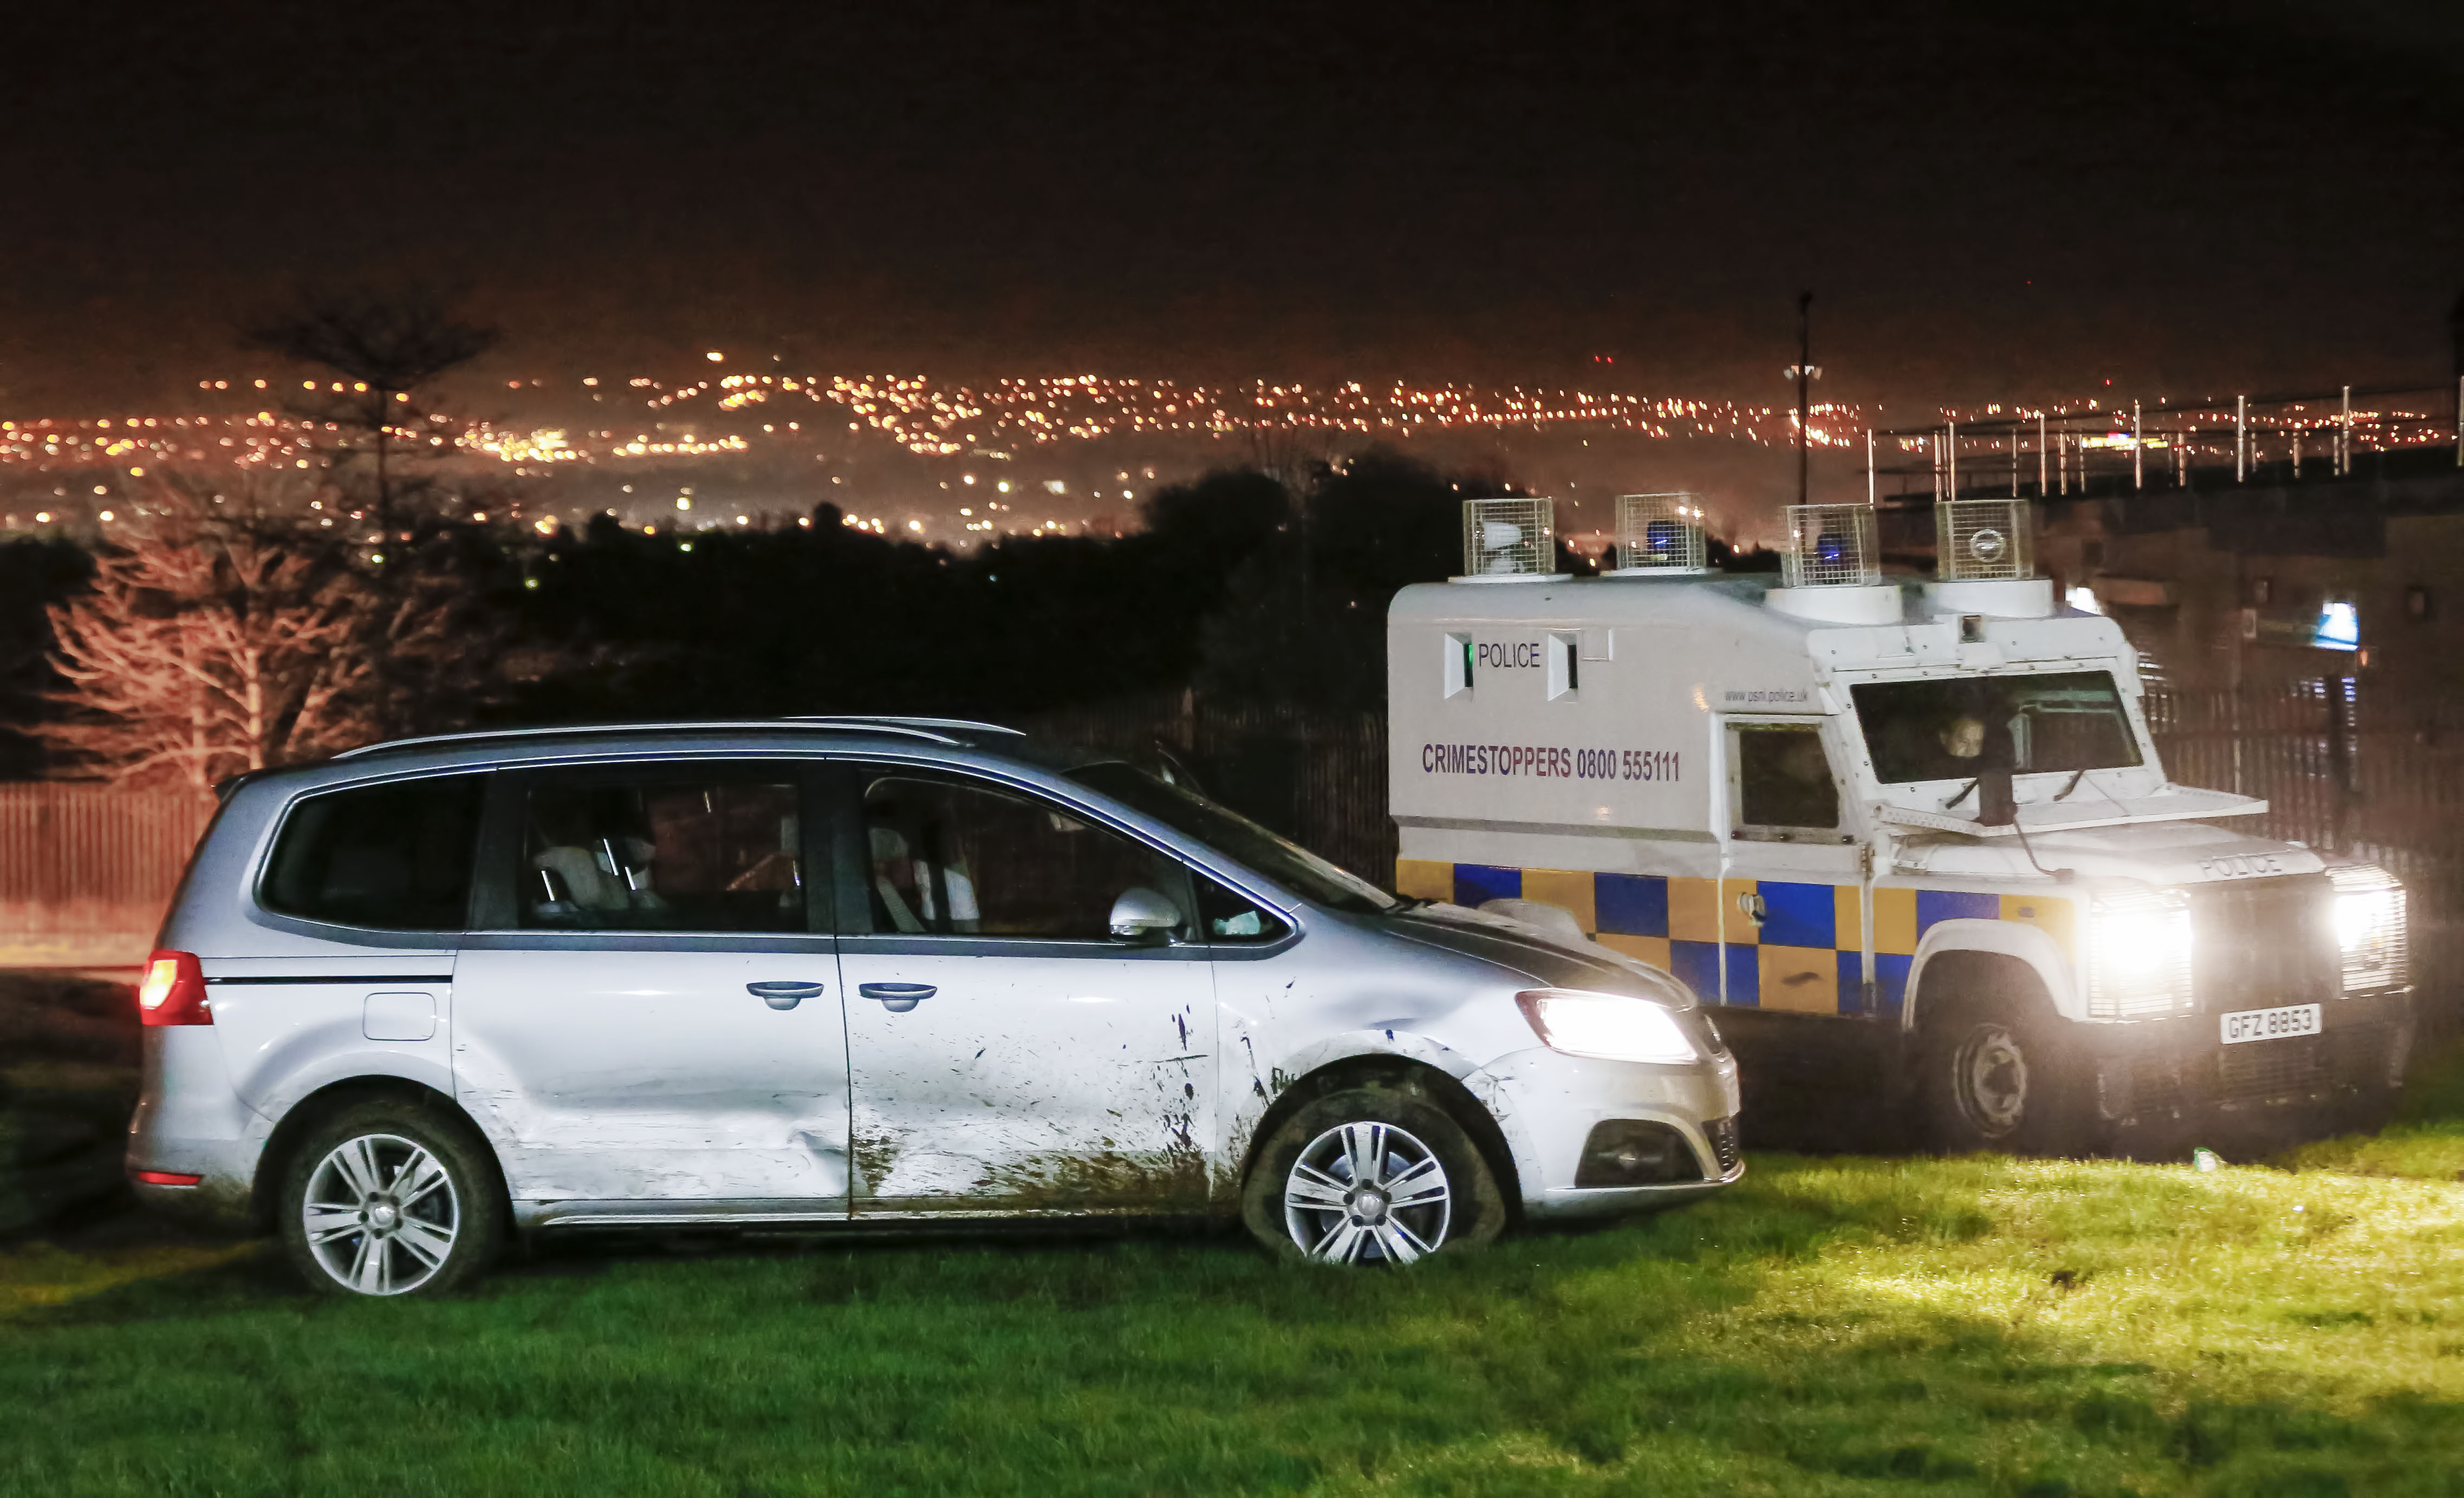 The Seat Alhambra stolen in Bladon Drive collided with two police vehicles